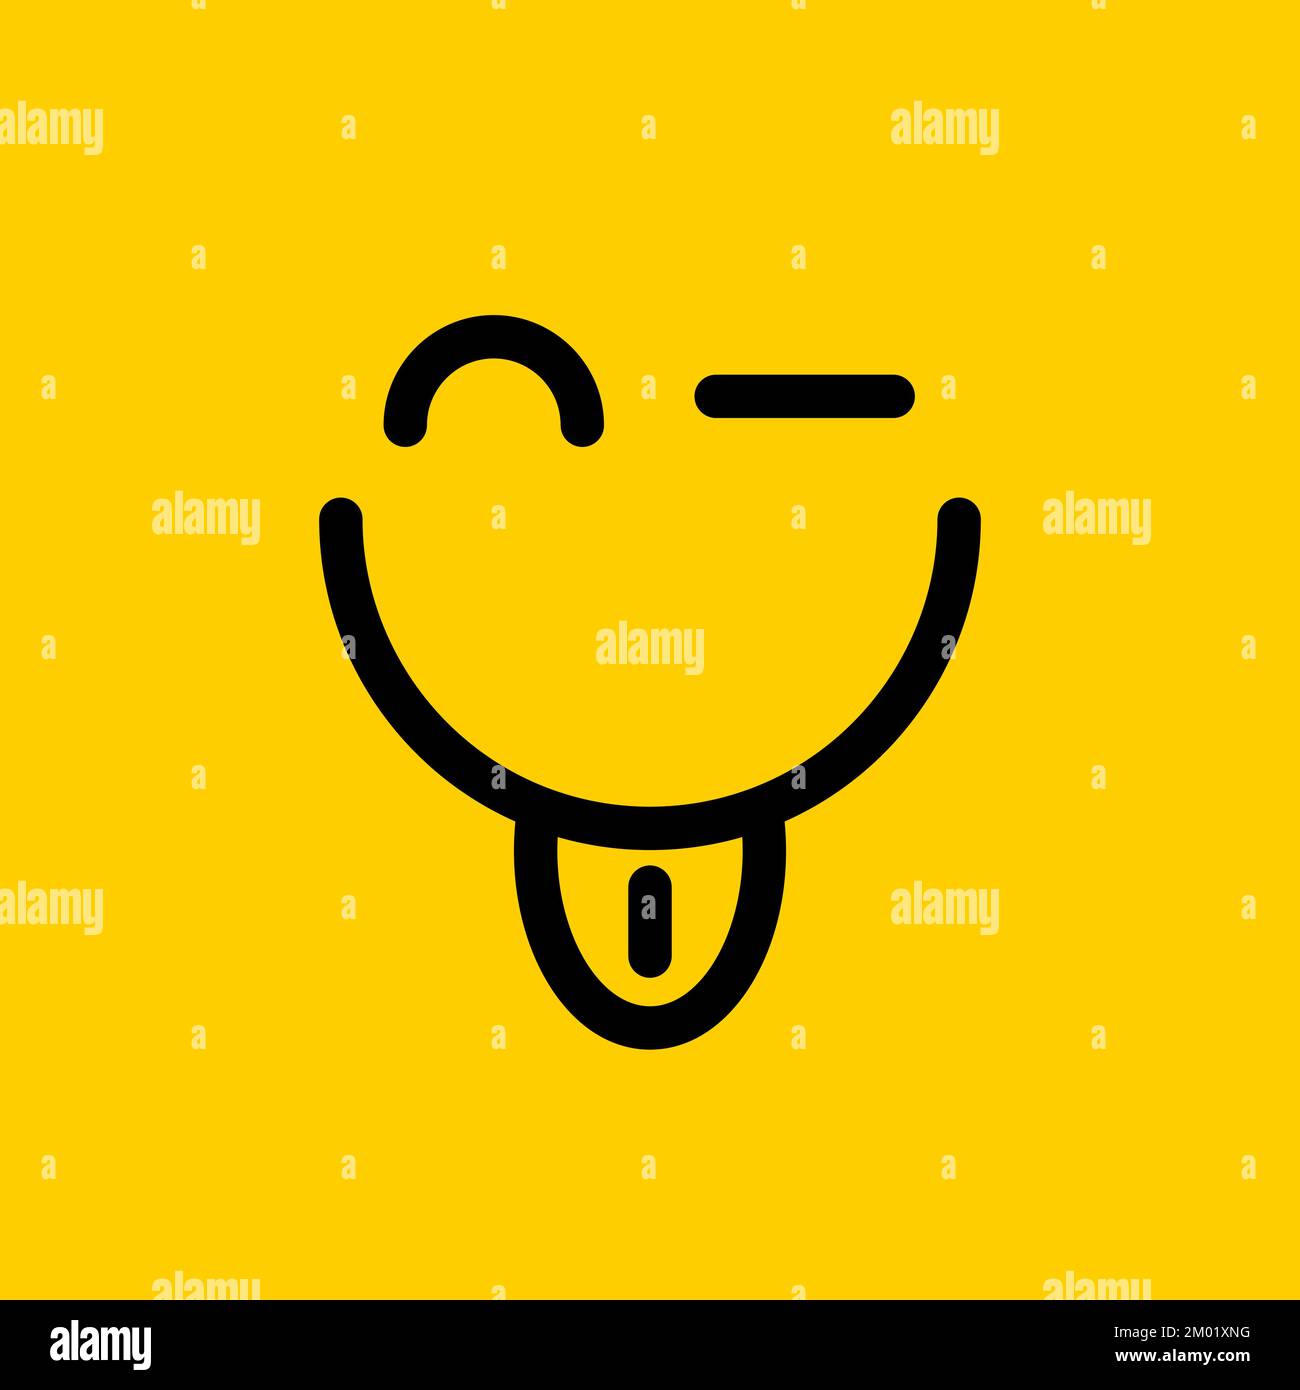 Cheer up poster, wink logo, blink icon. Yellow and black funny card with smile and tongue sticking out Stock Vector